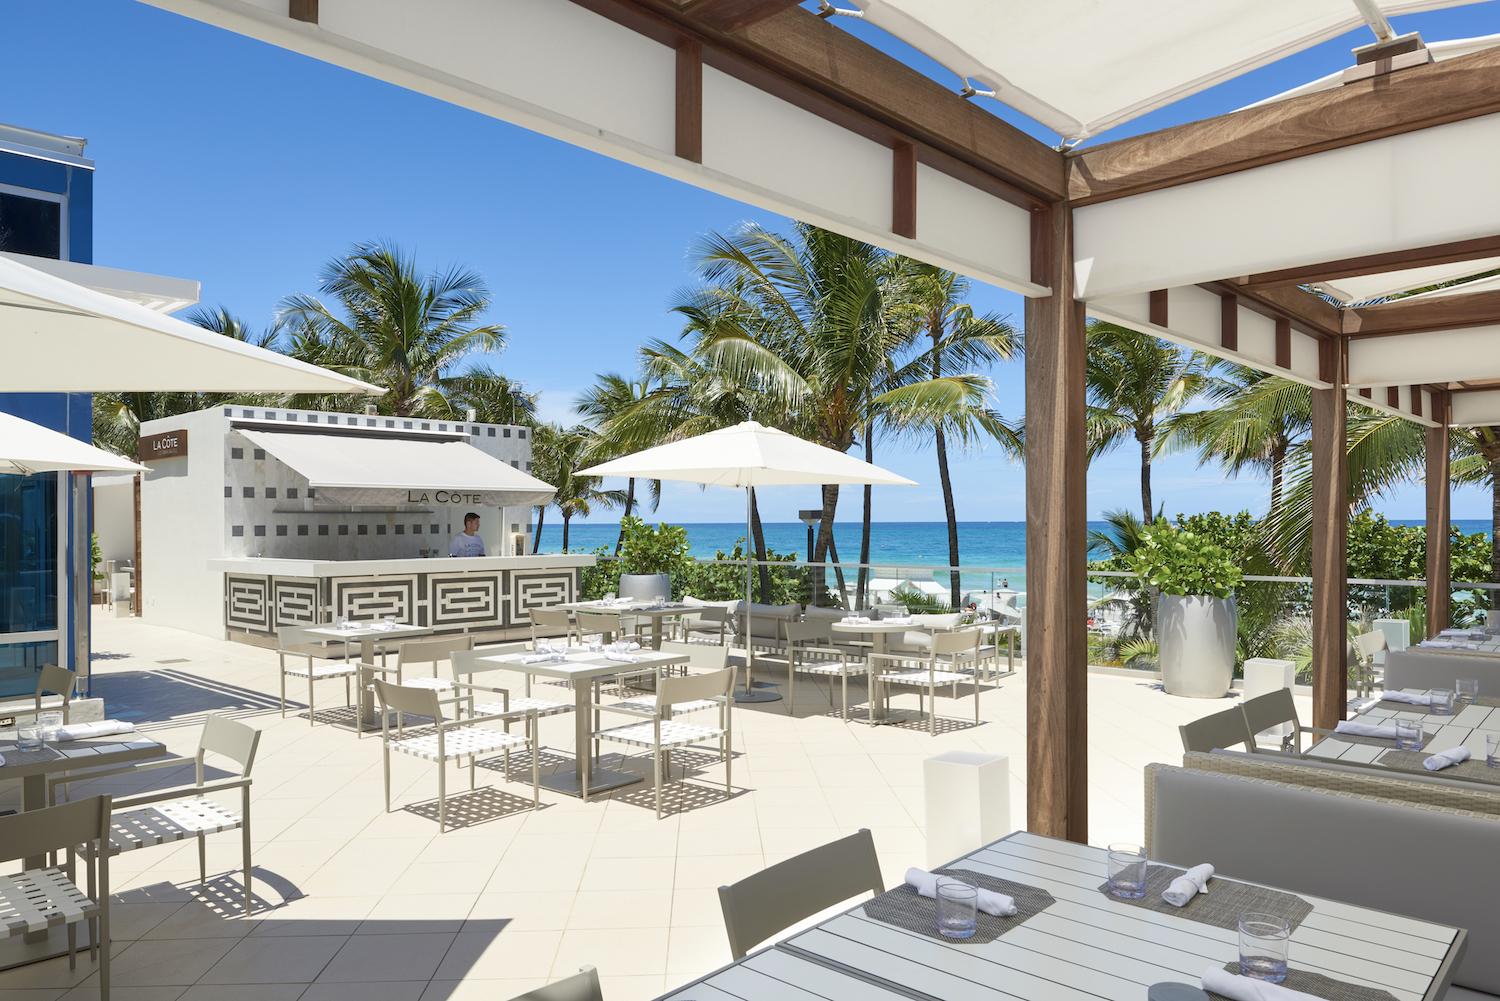 Patio area at a restaurant alongside the beach. miami best restaurants with a view